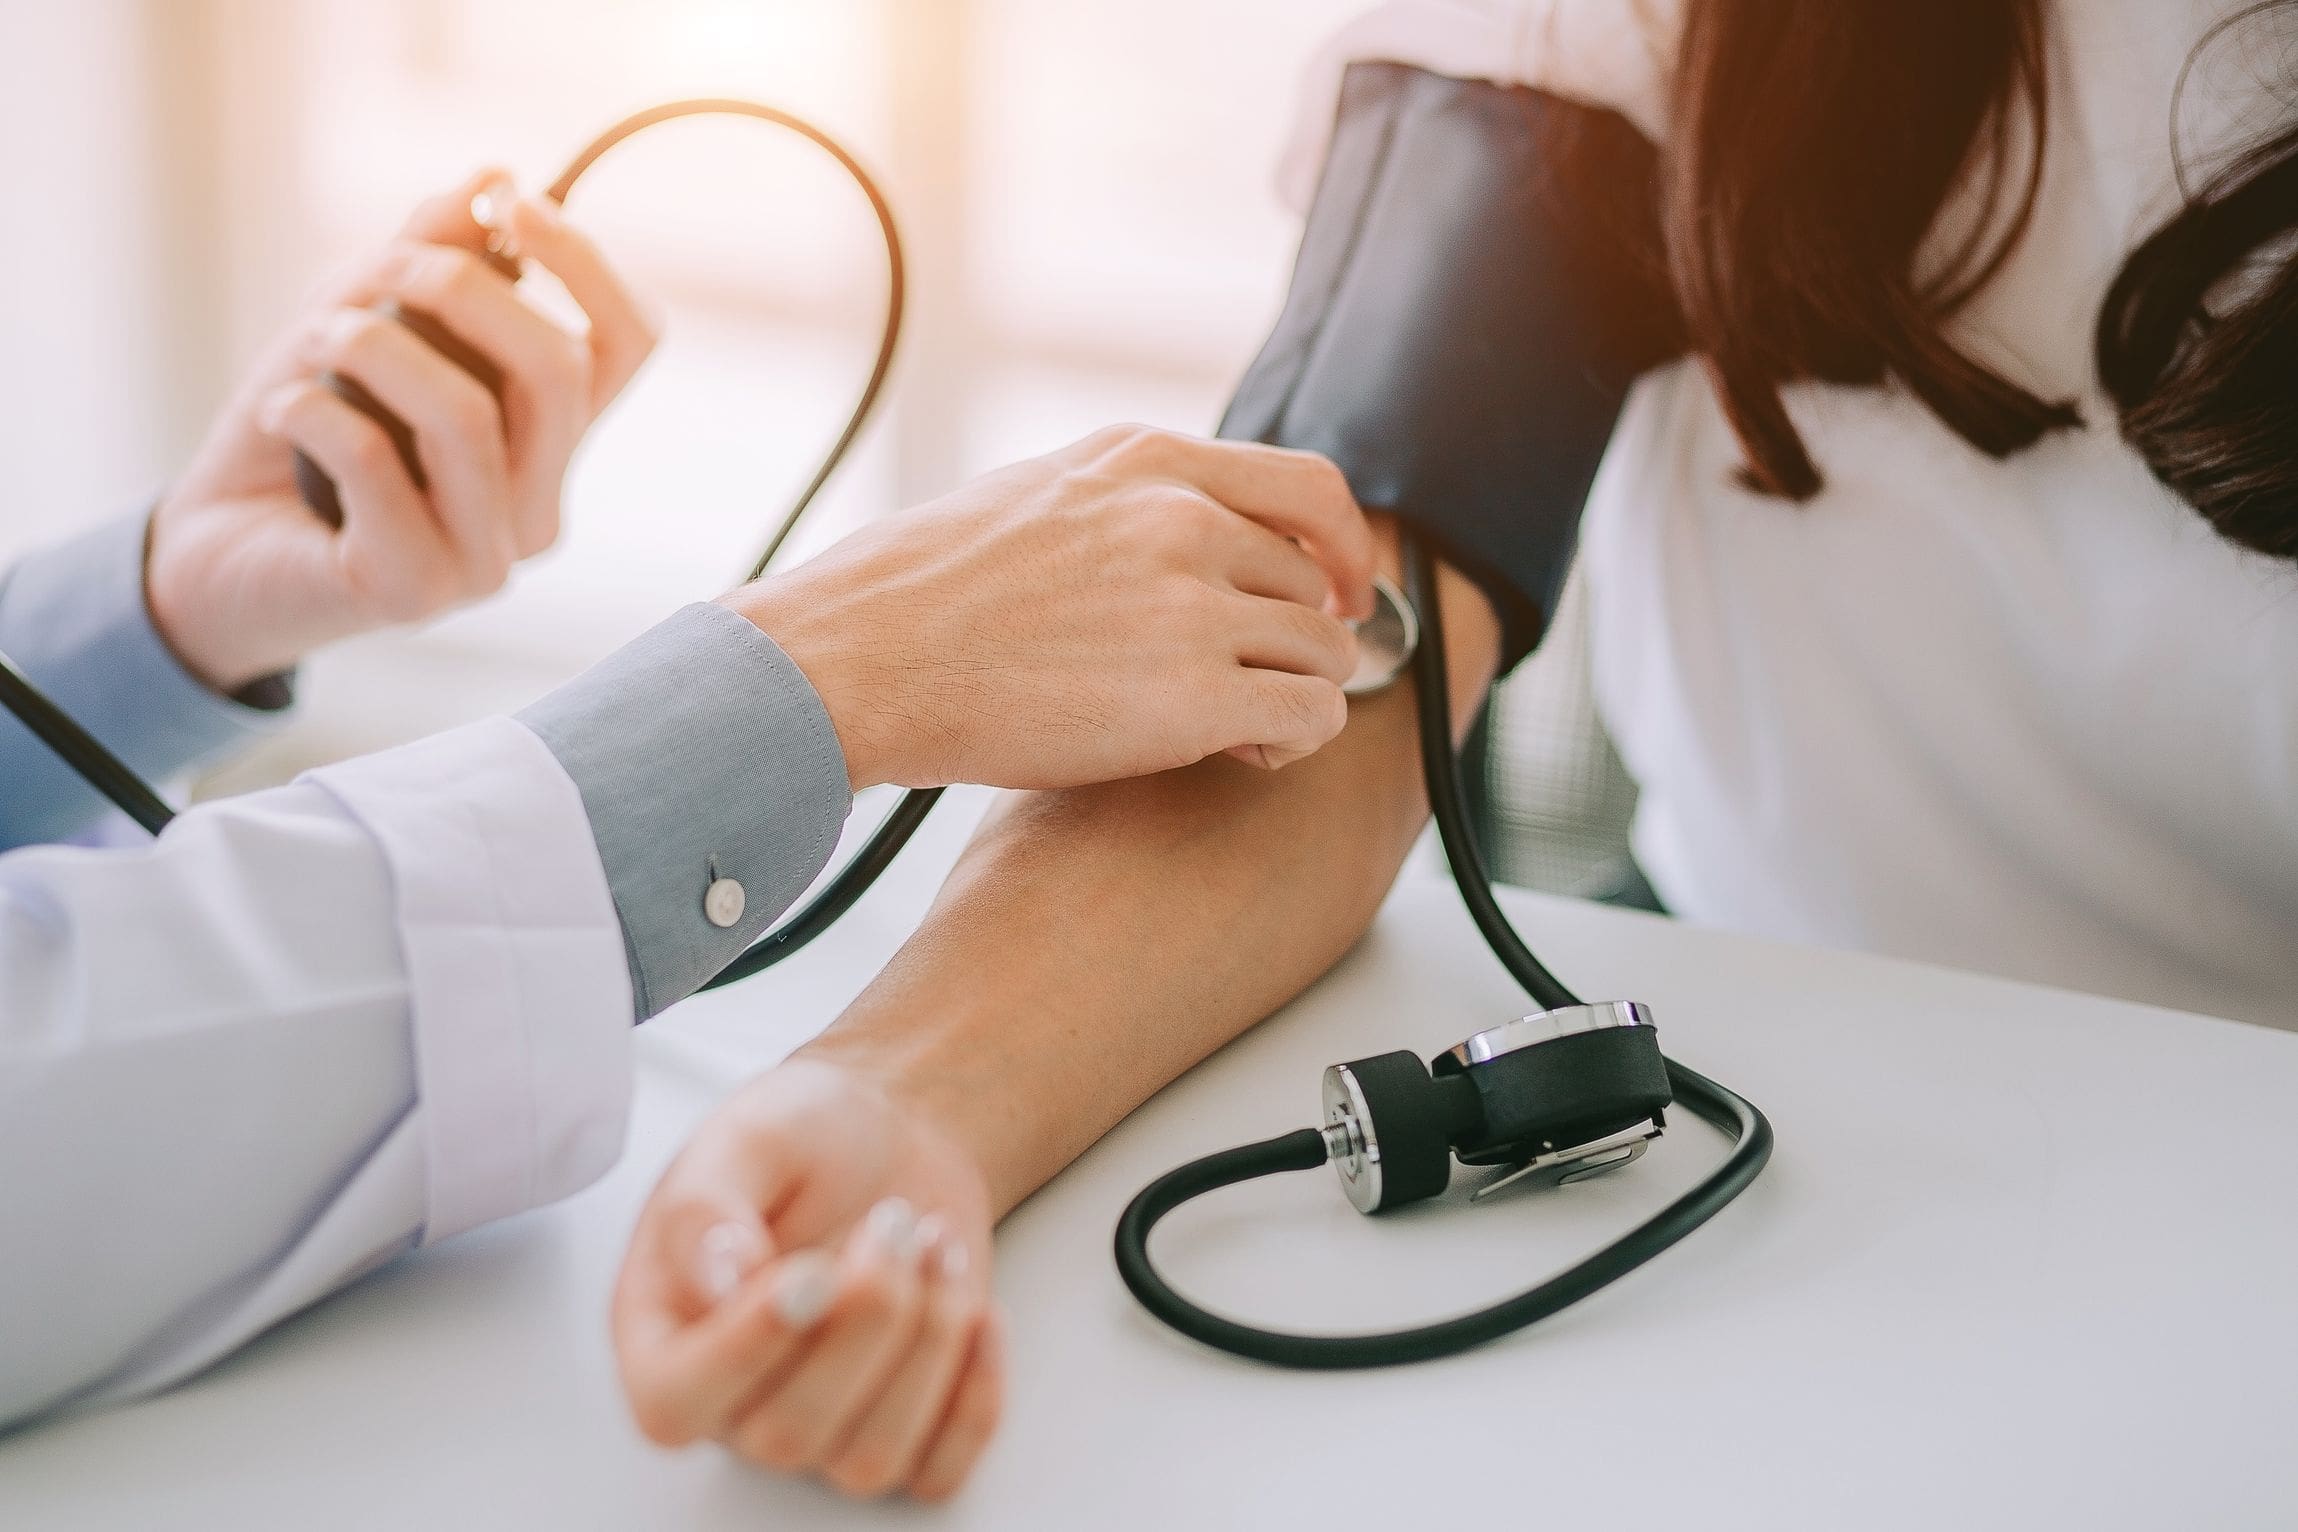 Redefining high blood pressure – will that help?